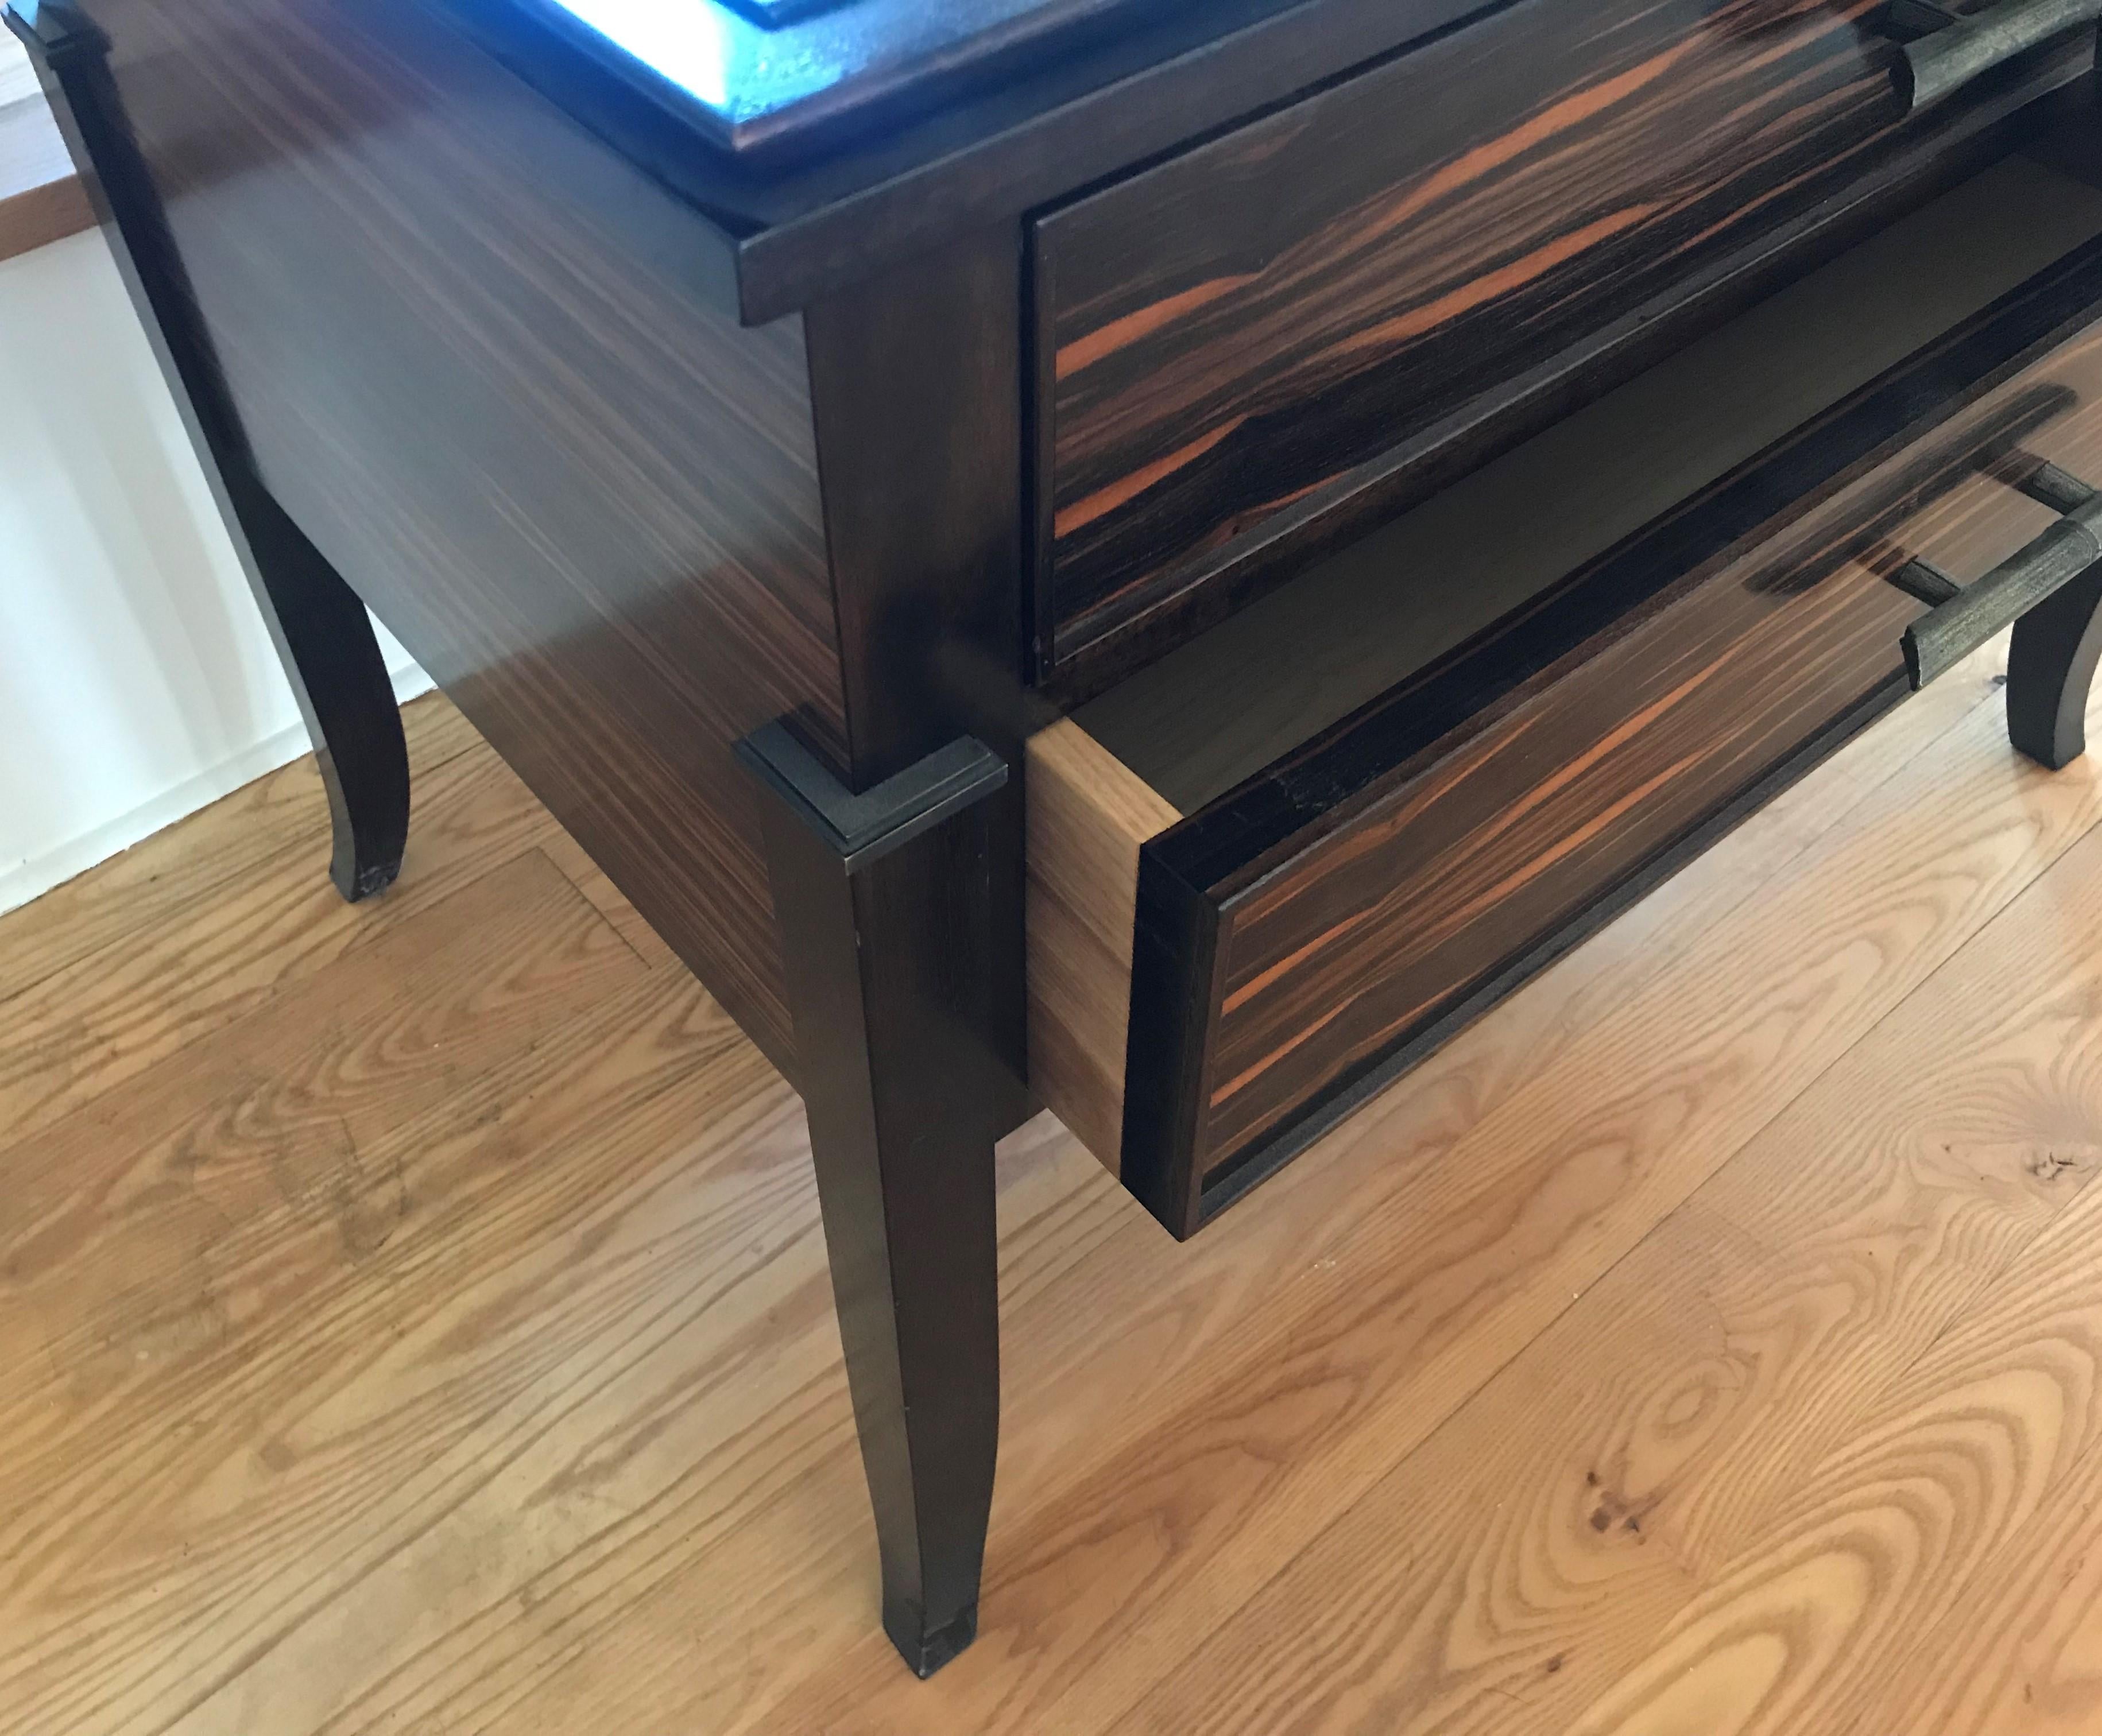 One floor sample in stock now 25% off. 

Macassar ebony side table / chest
This beautiful piece in Maccassar ebony and solid walnut is an oversized side table with two substantial drawers. 

The side table pictured is designed in Macassar ebony with